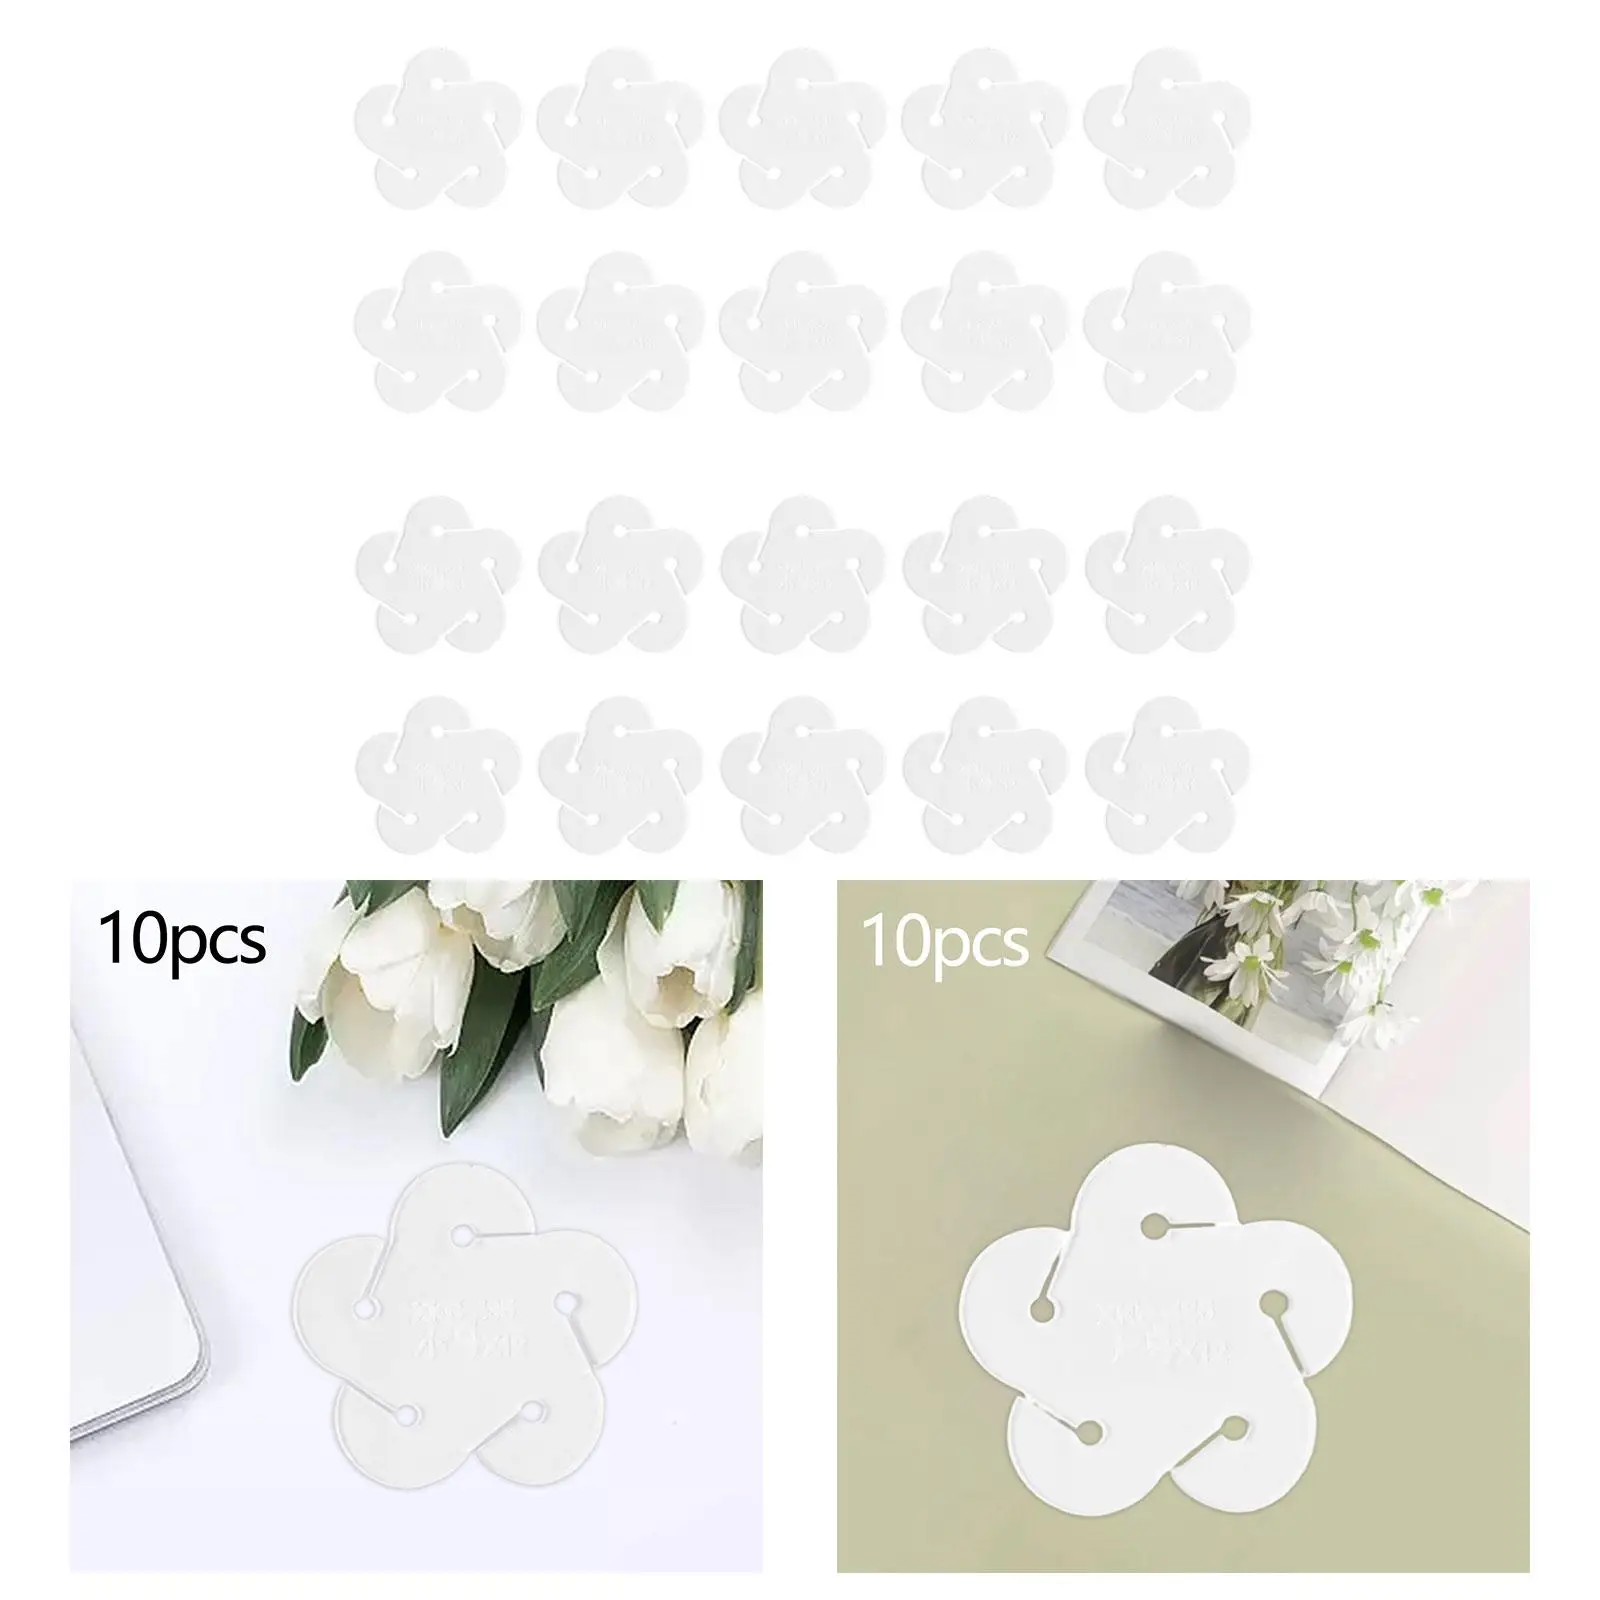 10Pcs Key Chain Durable Acrylic Clear Template for Stitching Attachments